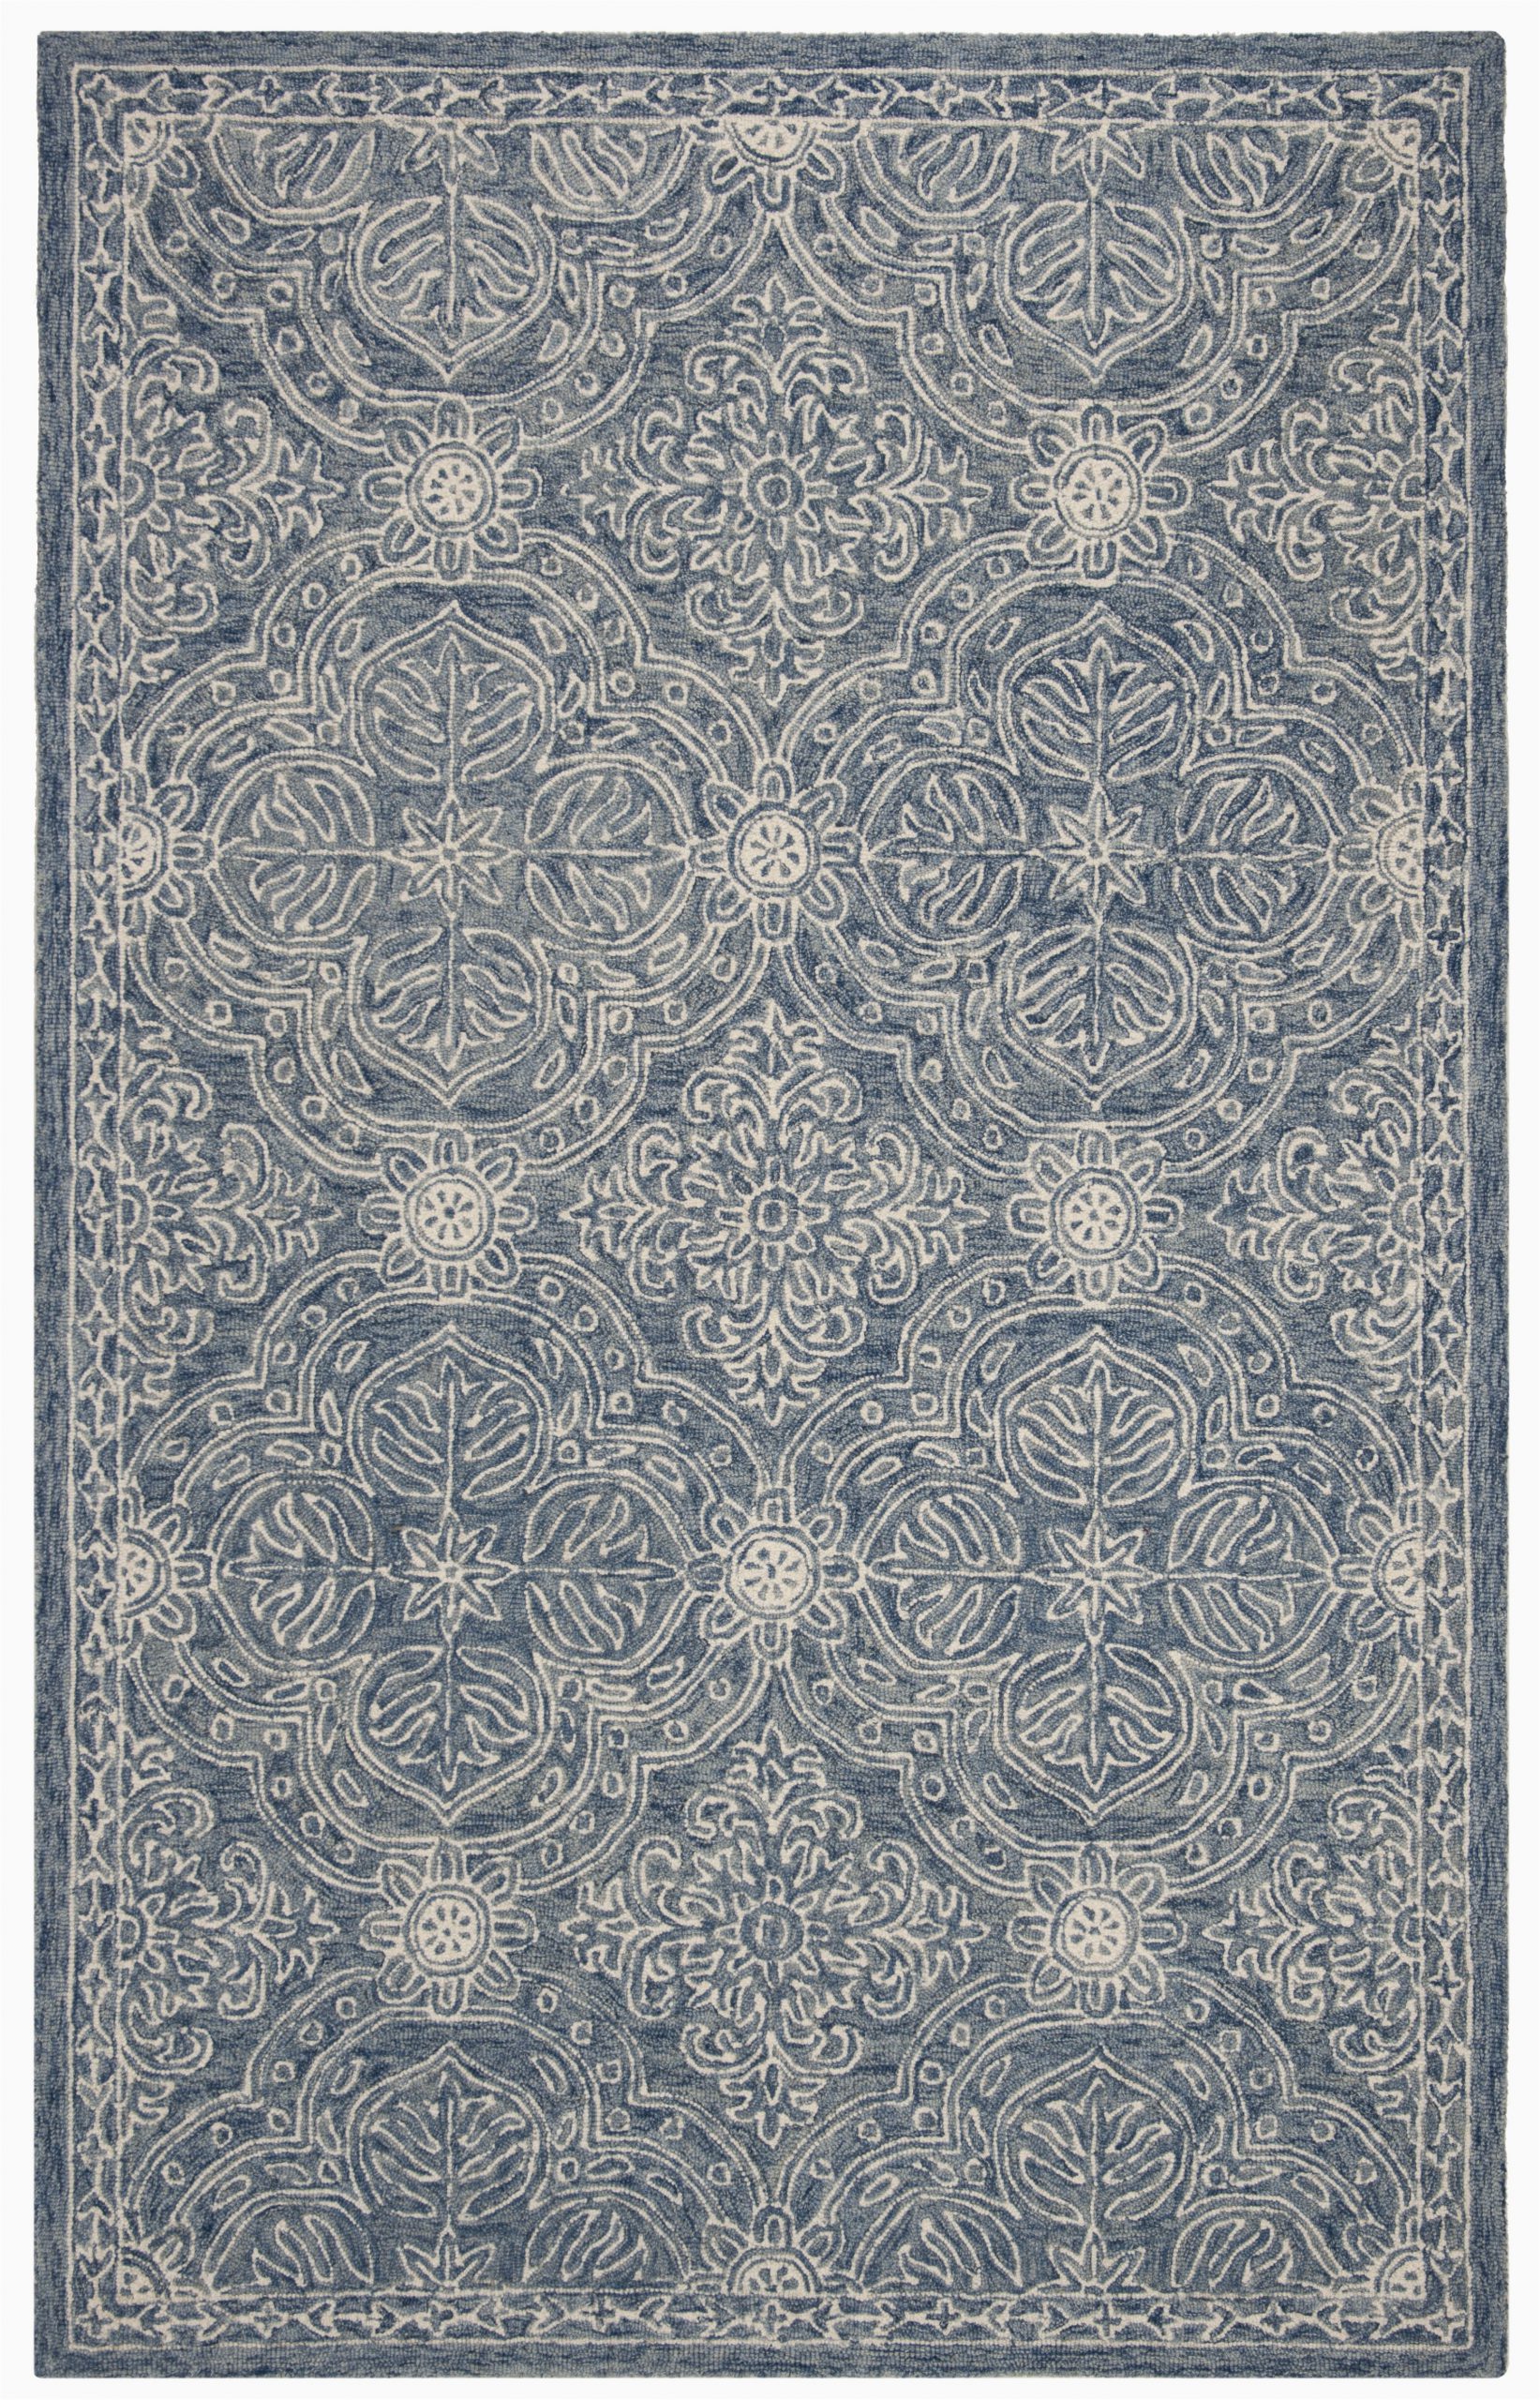 etienne hand tufted wool blueivory area rug